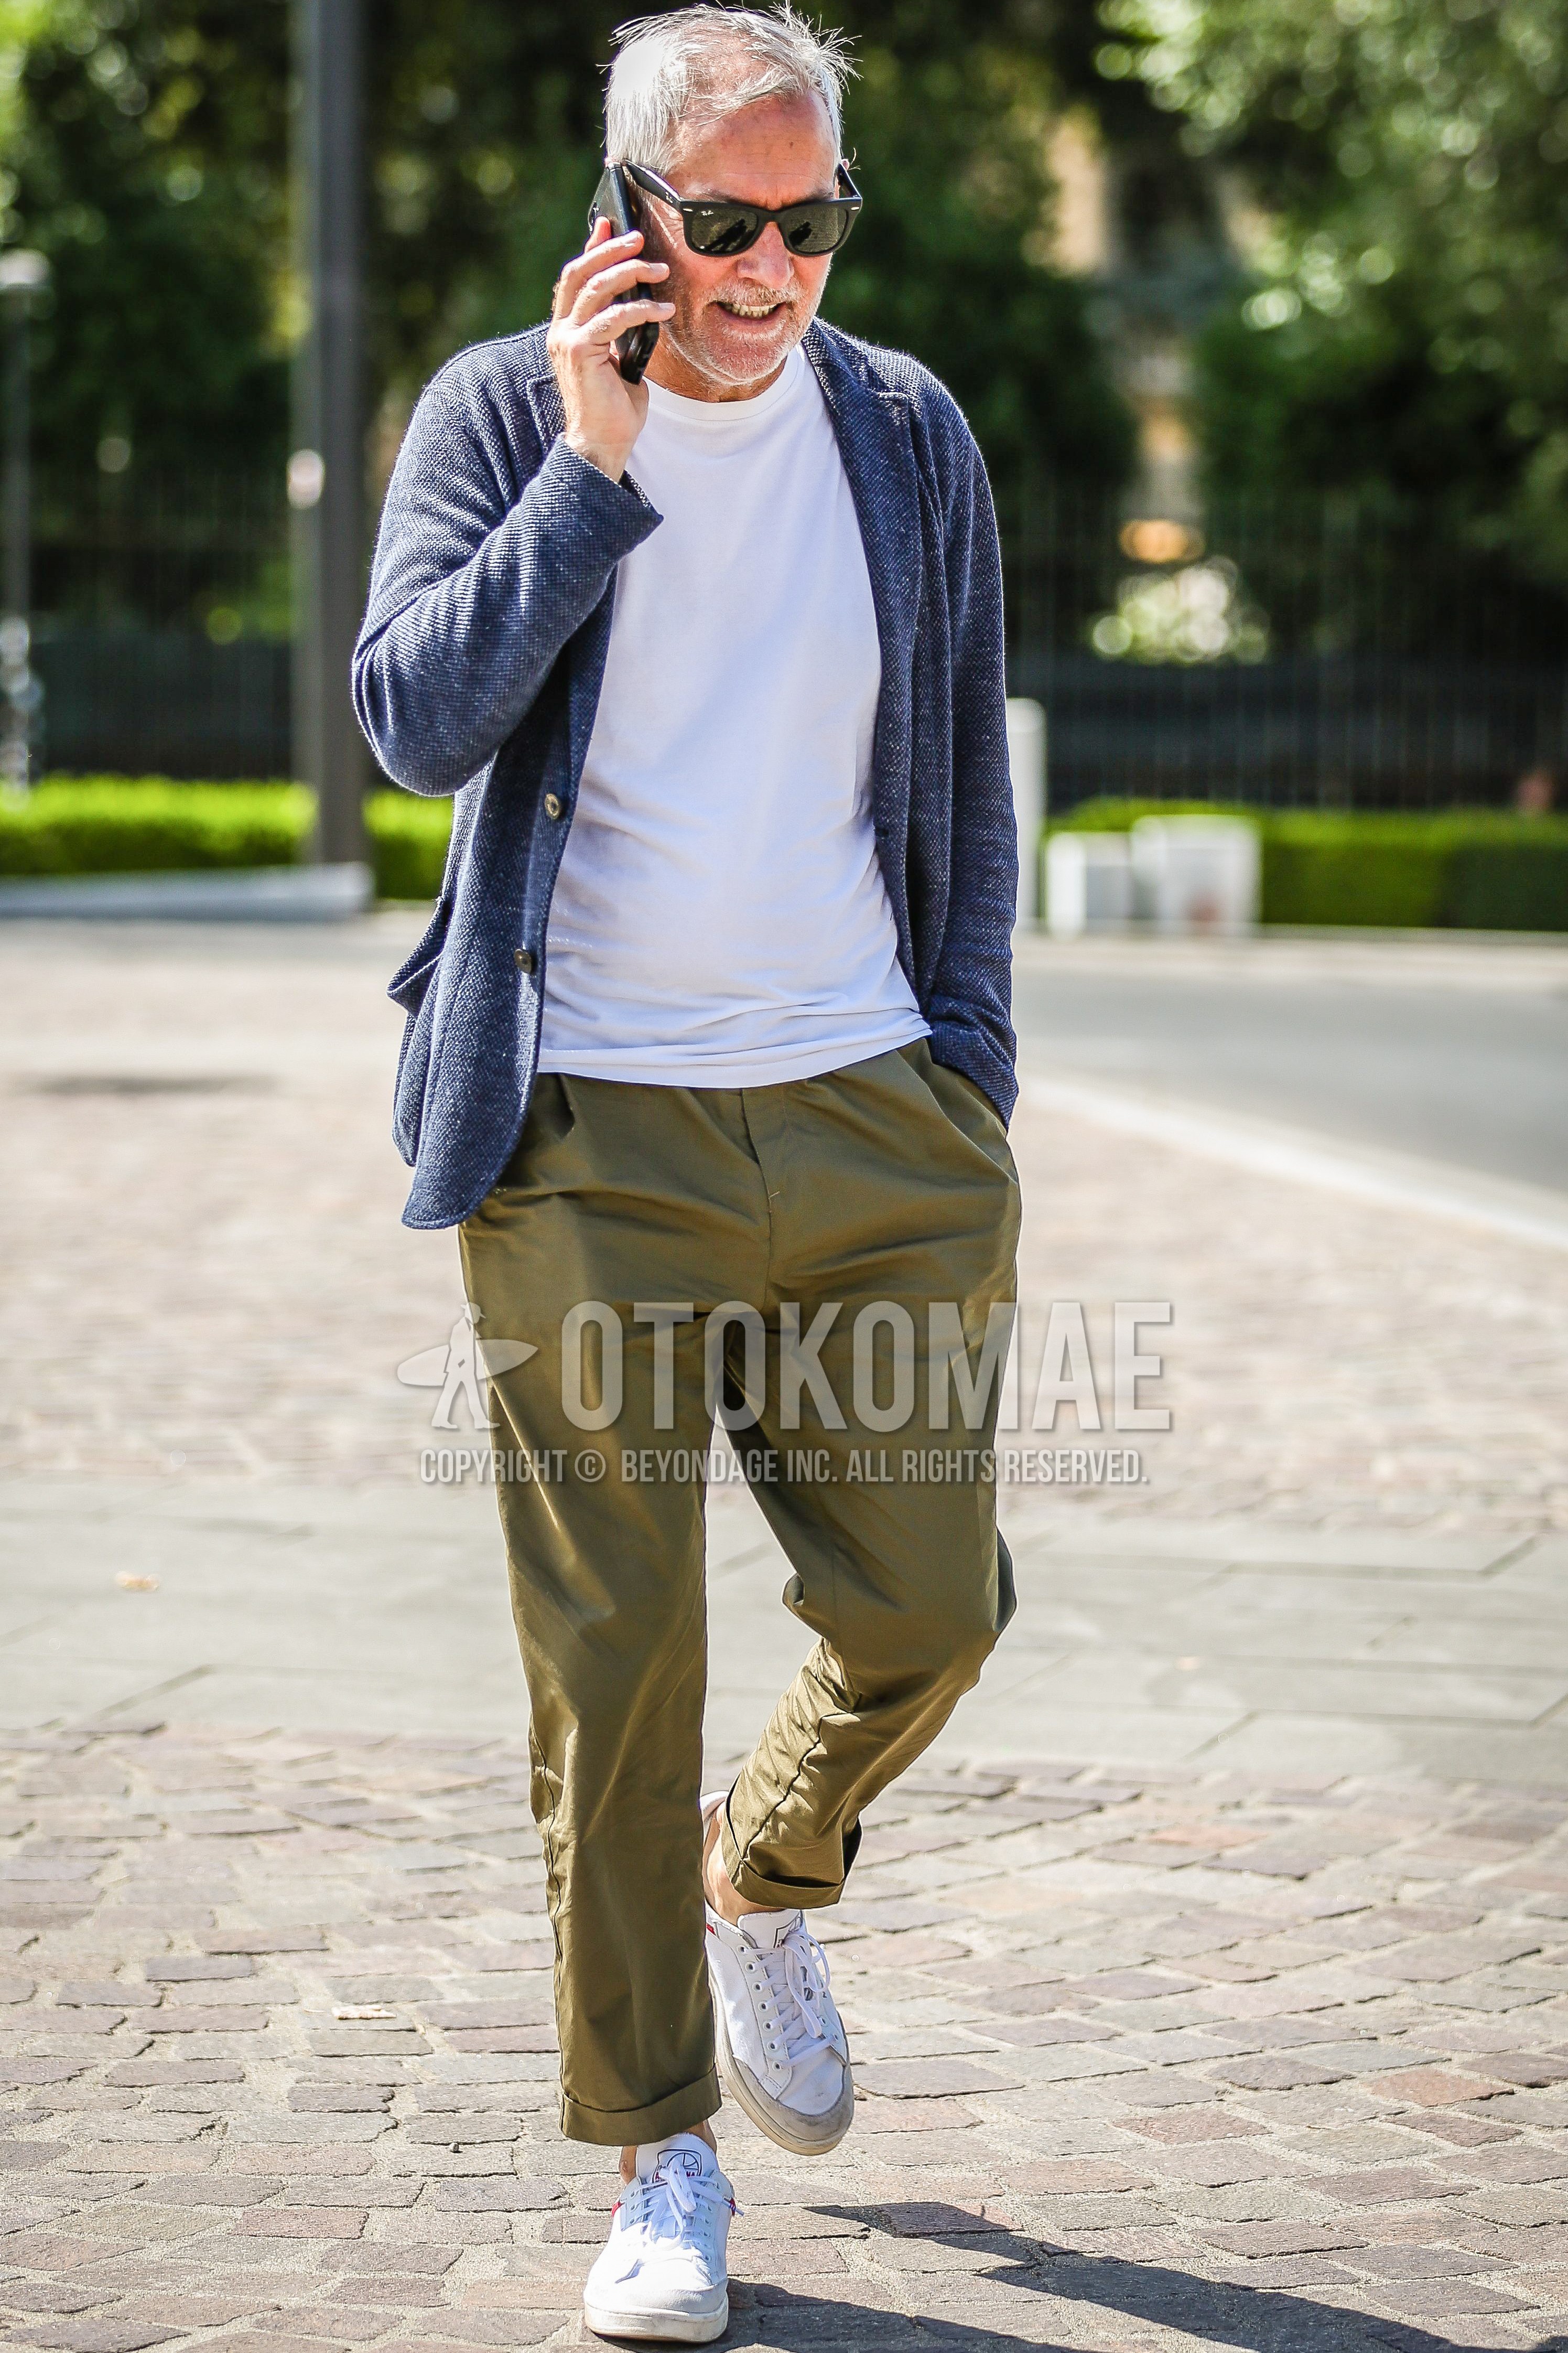 Men's spring summer outfit with black plain sunglasses, blue outerwear tailored jacket, white plain t-shirt, olive green plain chinos, white sneakers.